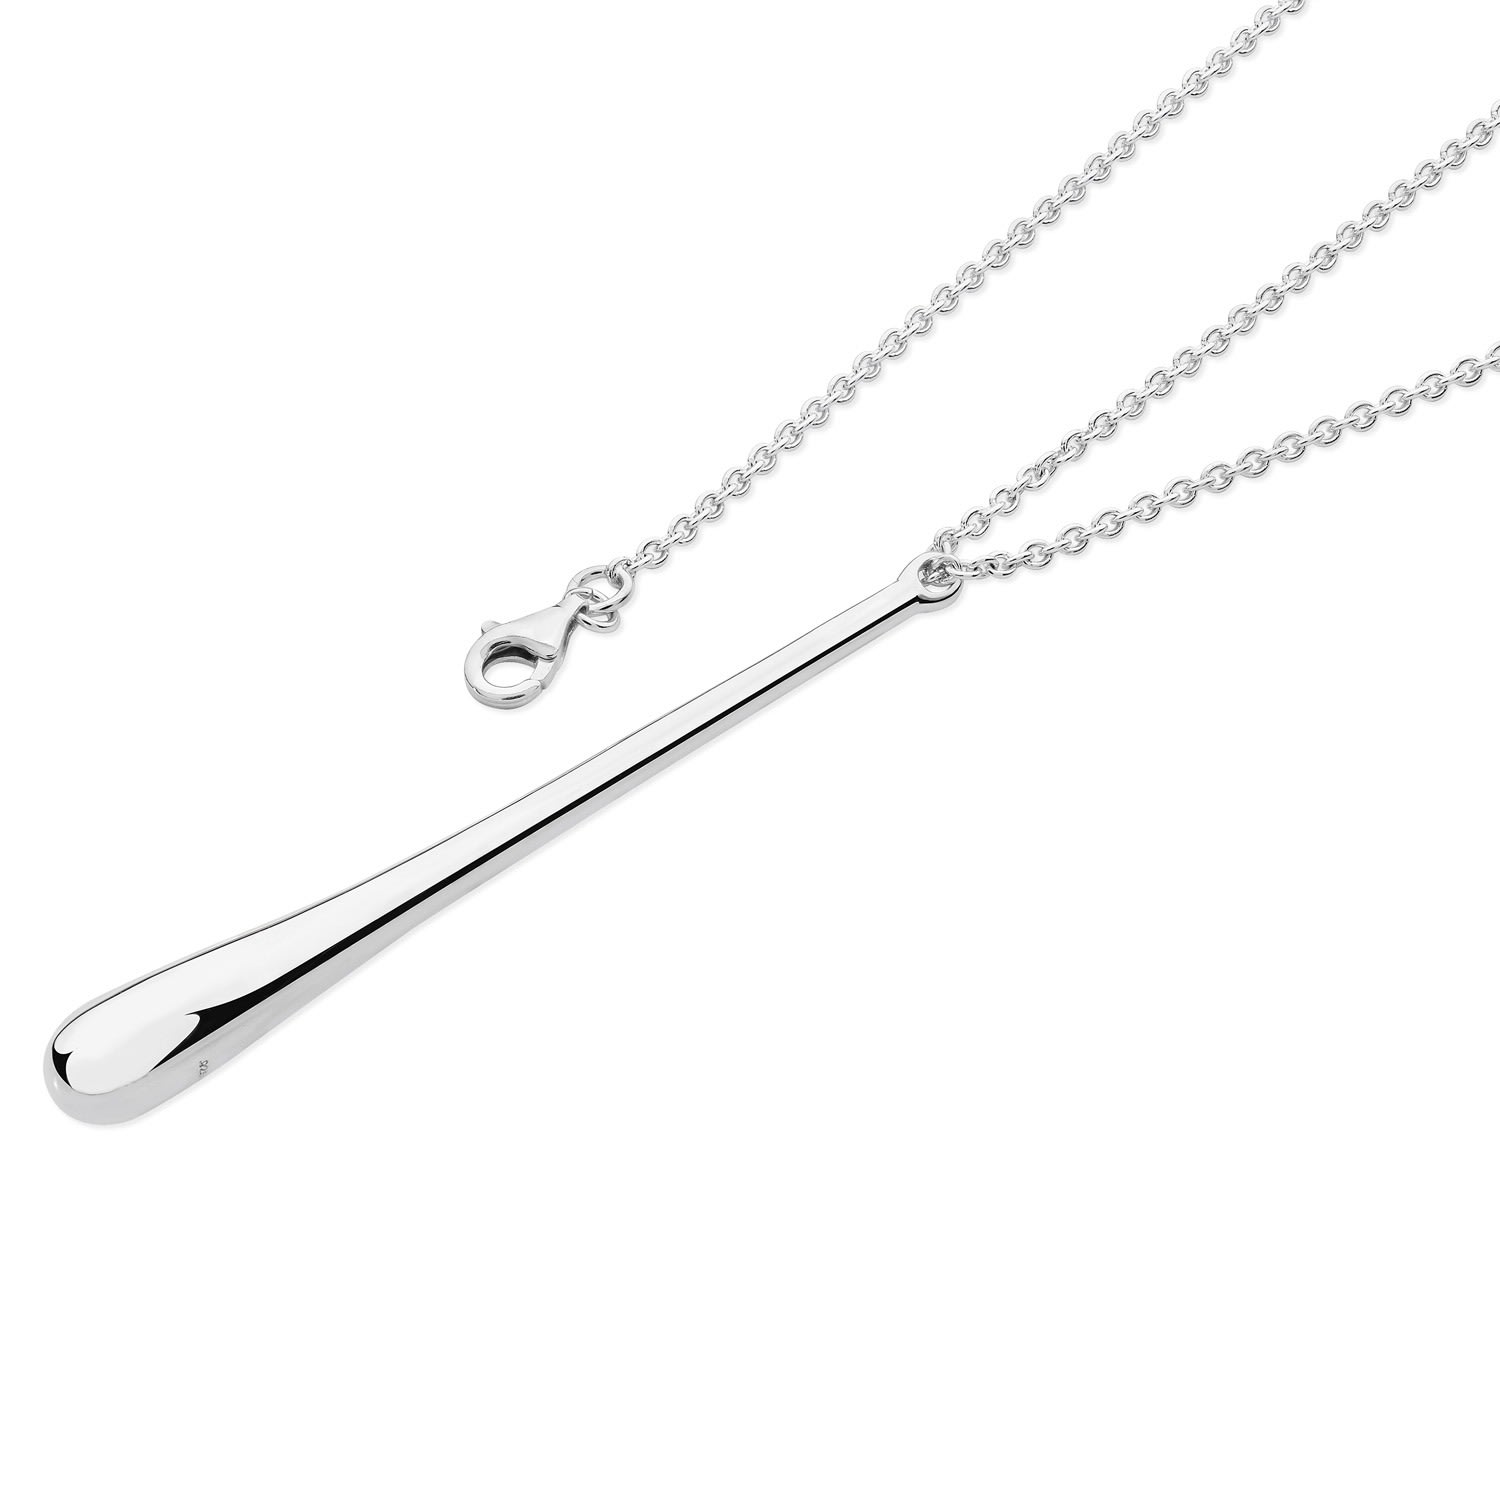 Women’s Silver Thirty-Two" Long Drop Necklace Lucy Quartermaine